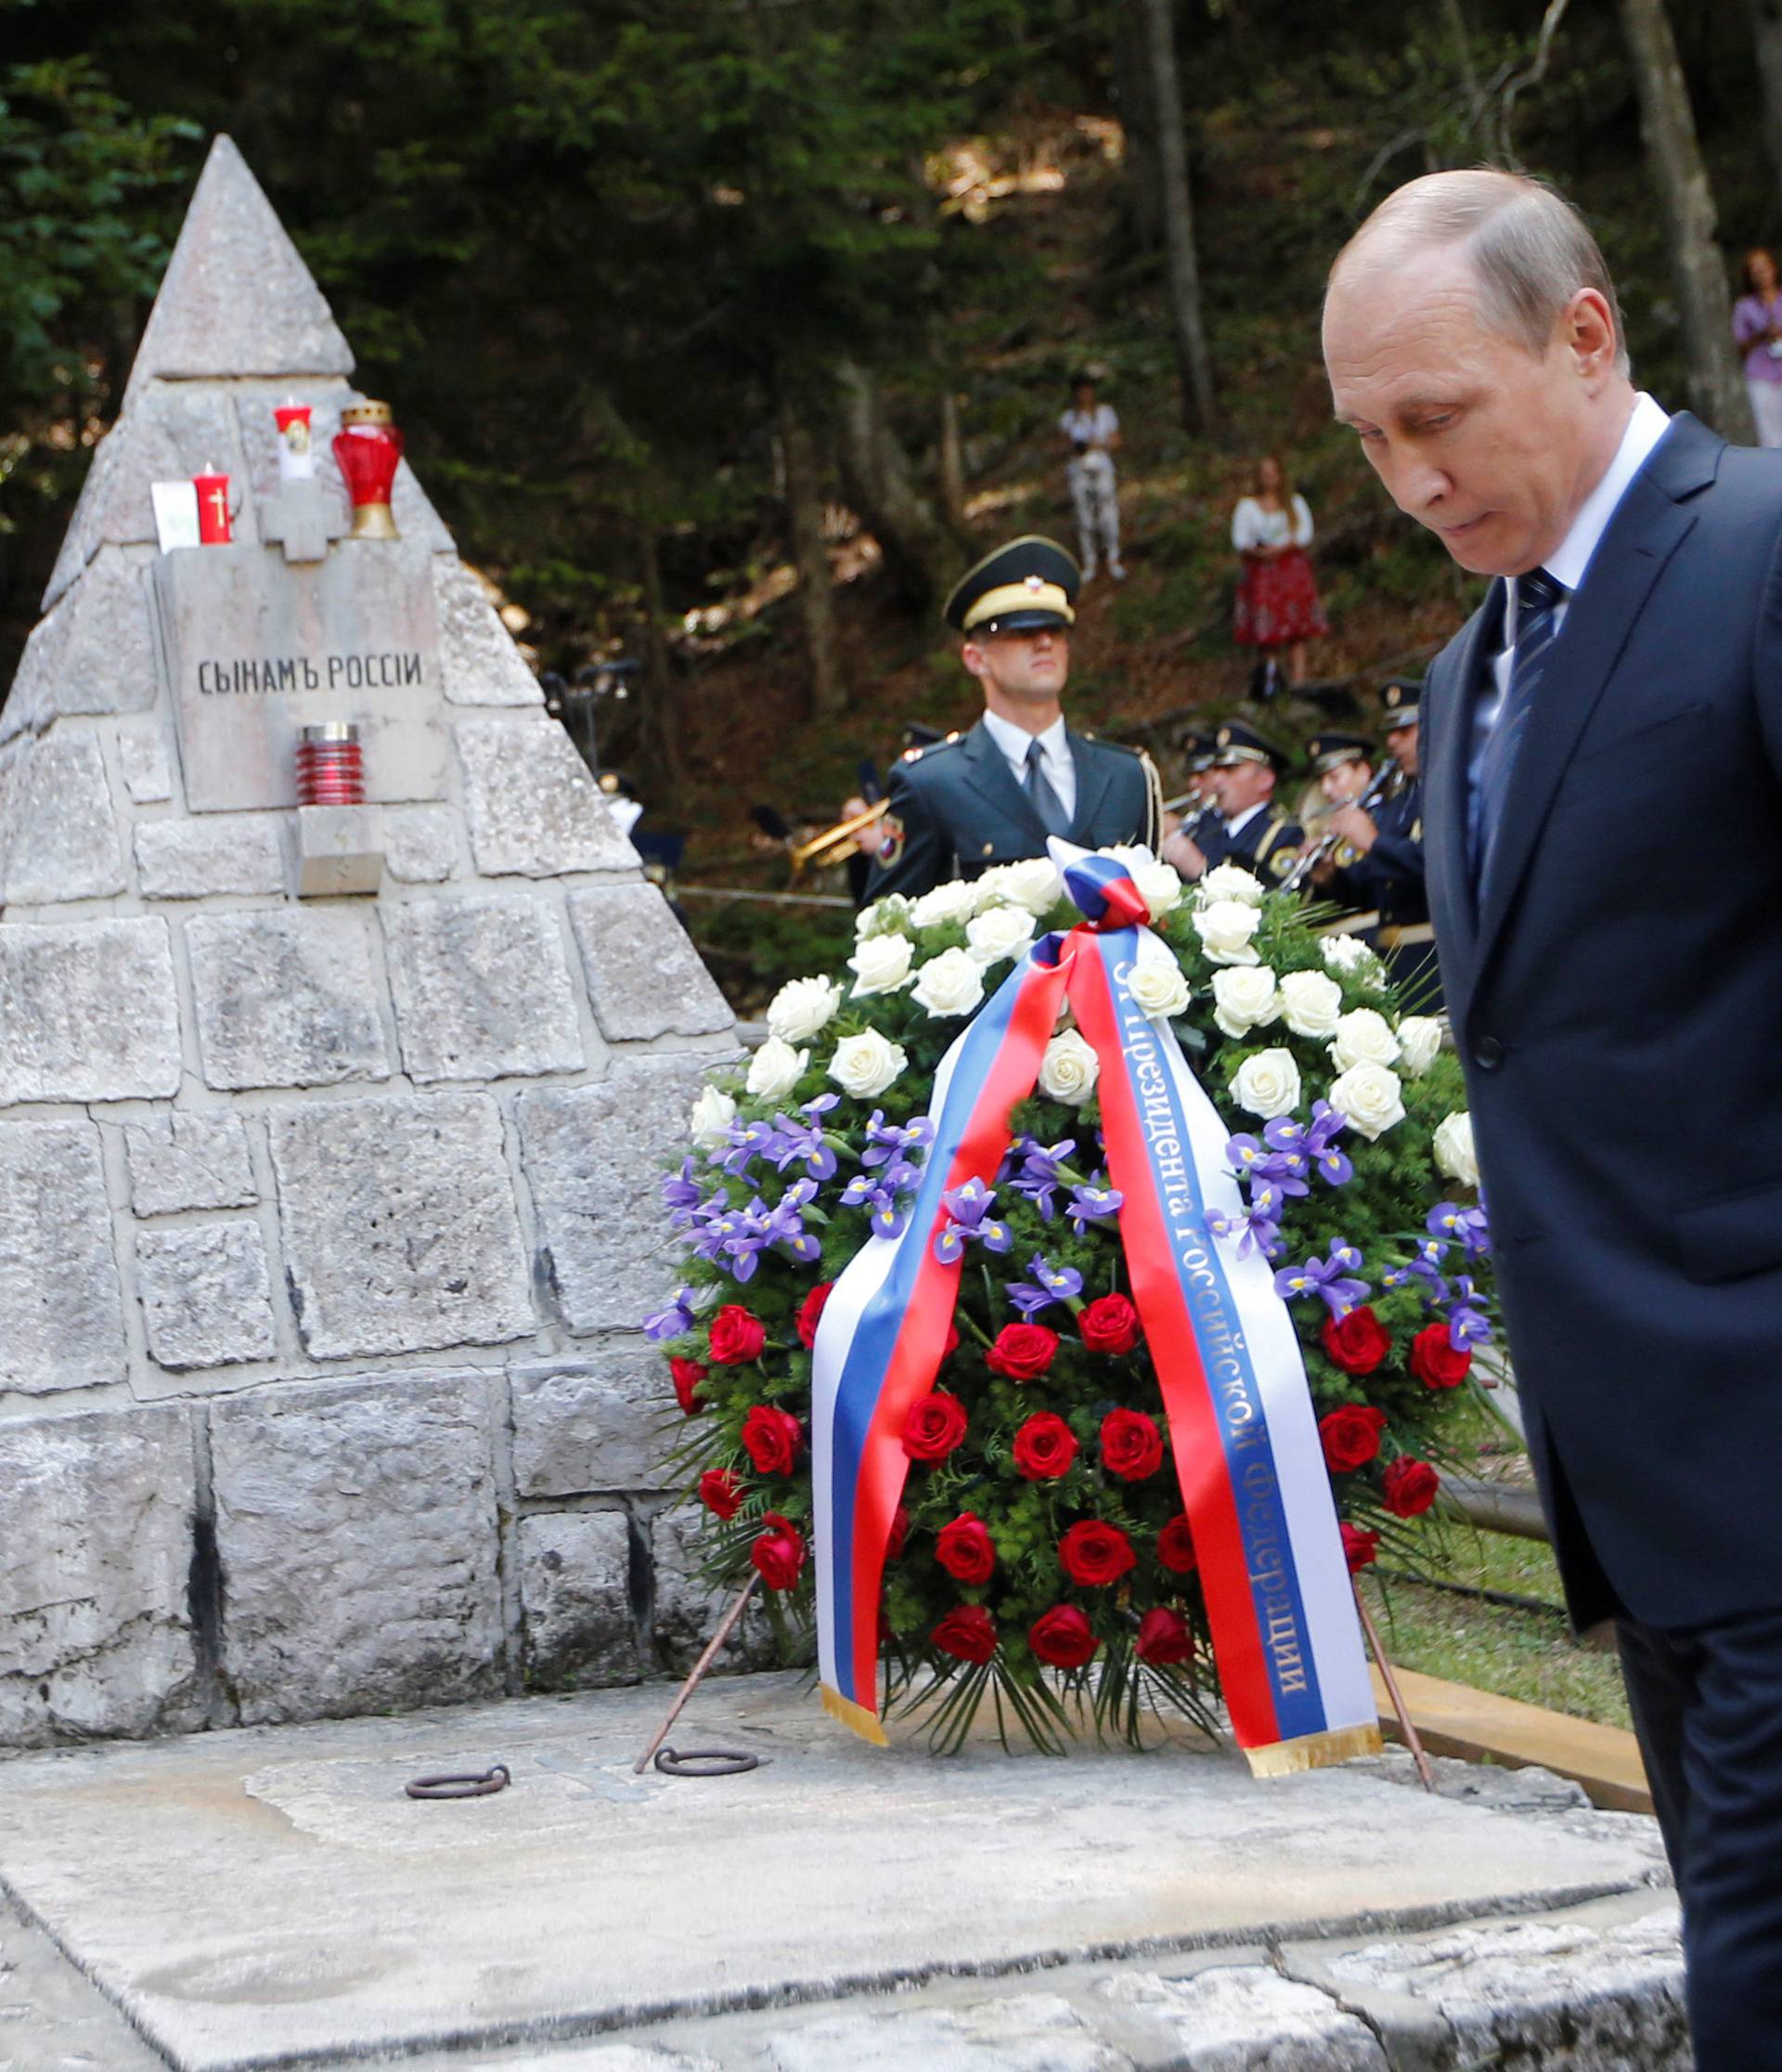 Russian President Vladimir Putin attends the commemoration of 100 years of the Russian chapel in Vrsic, Slovenia